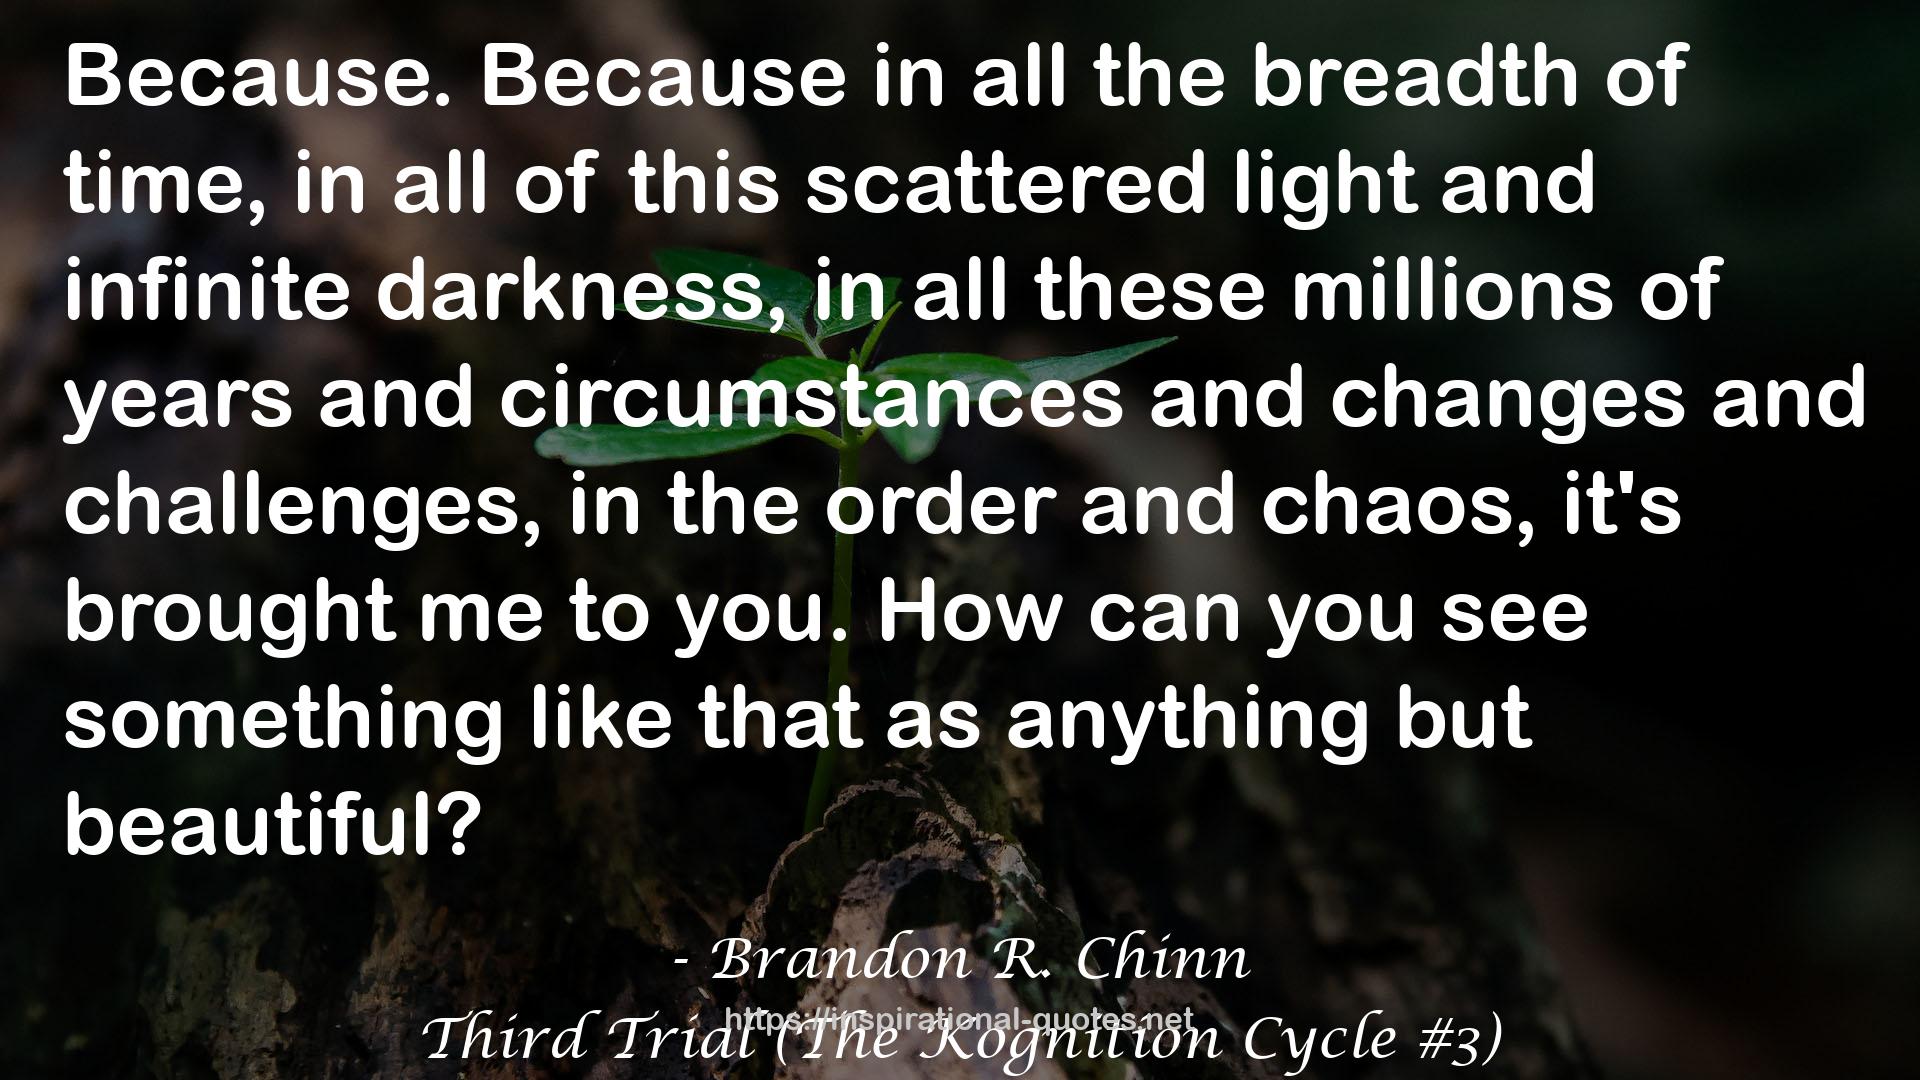 Third Trial (The Kognition Cycle #3) QUOTES